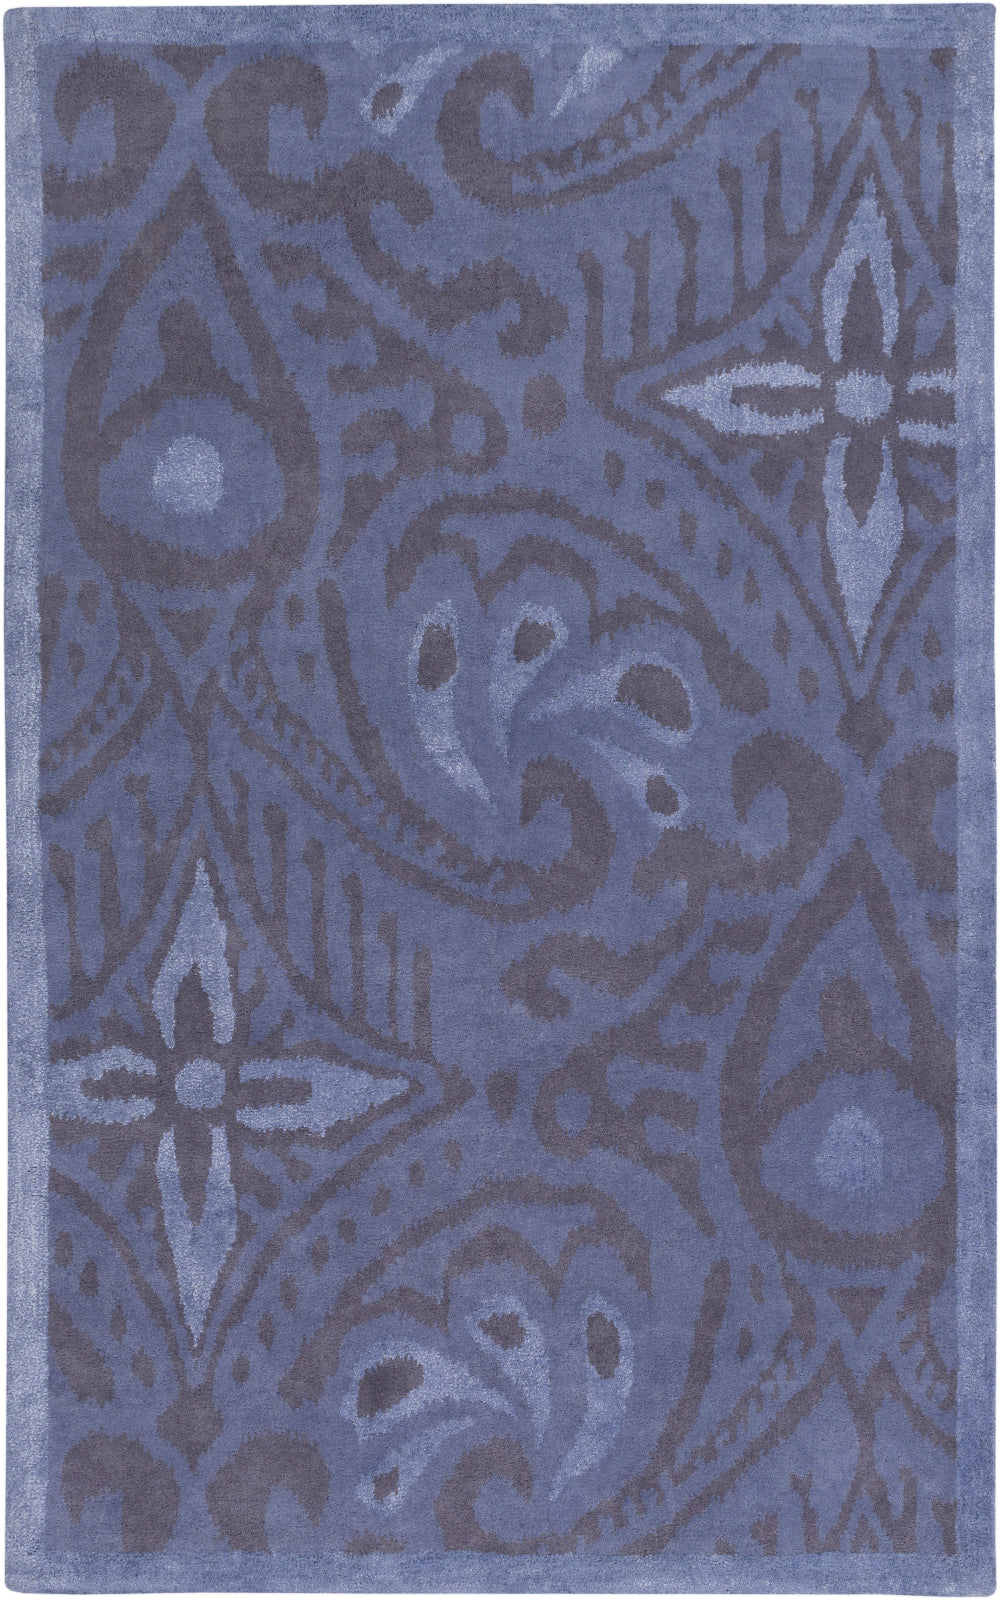 Surya Alhambra ALH-5024 Area Rug by Kate Spain main image